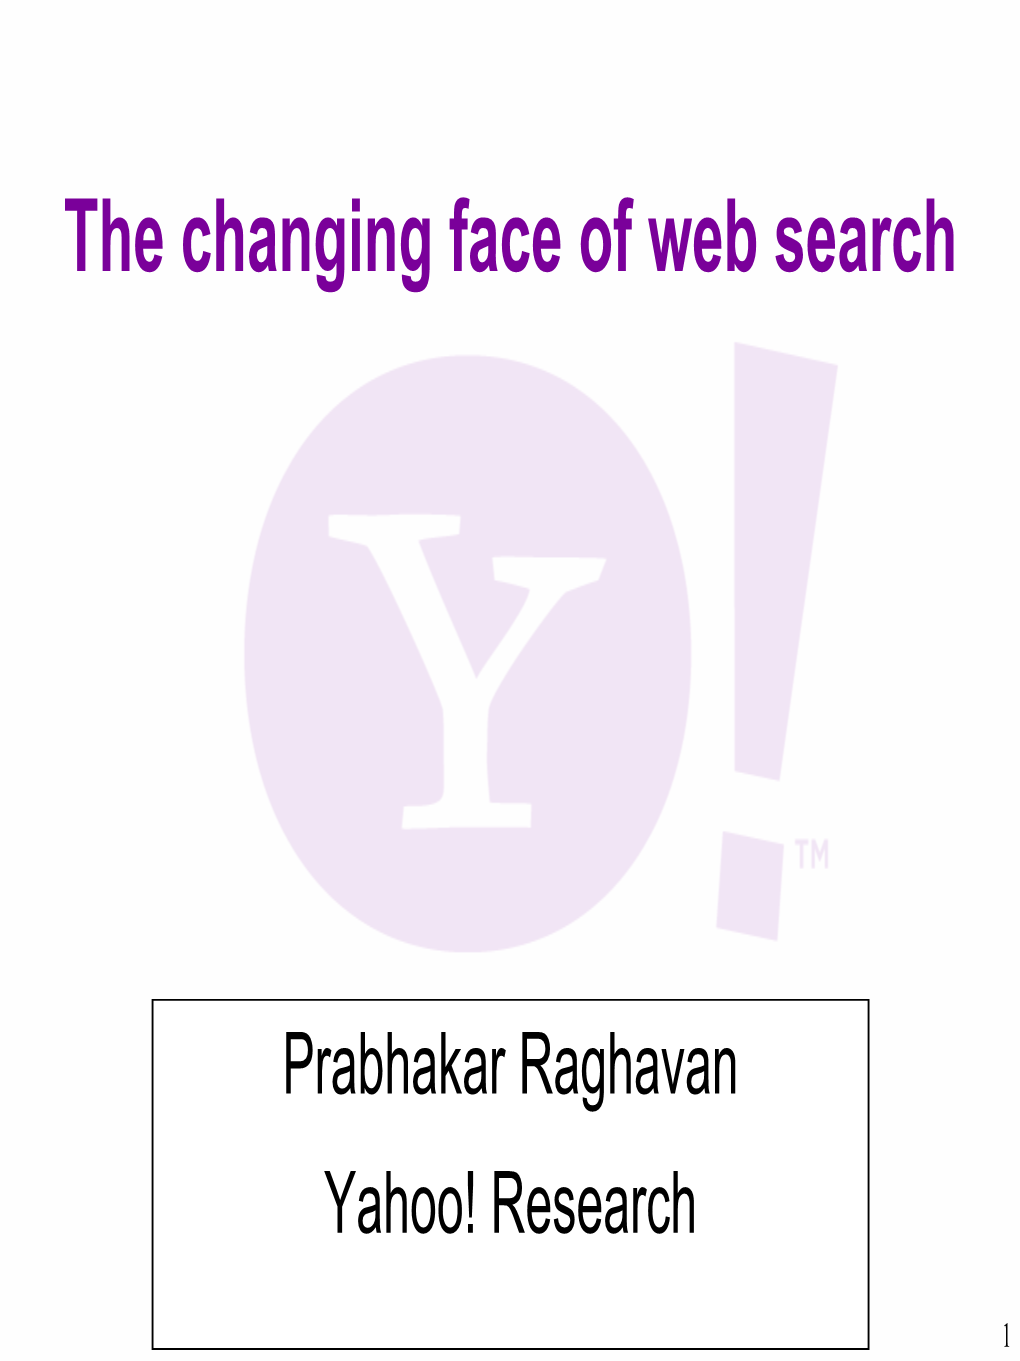 The Changing Face of Web Search